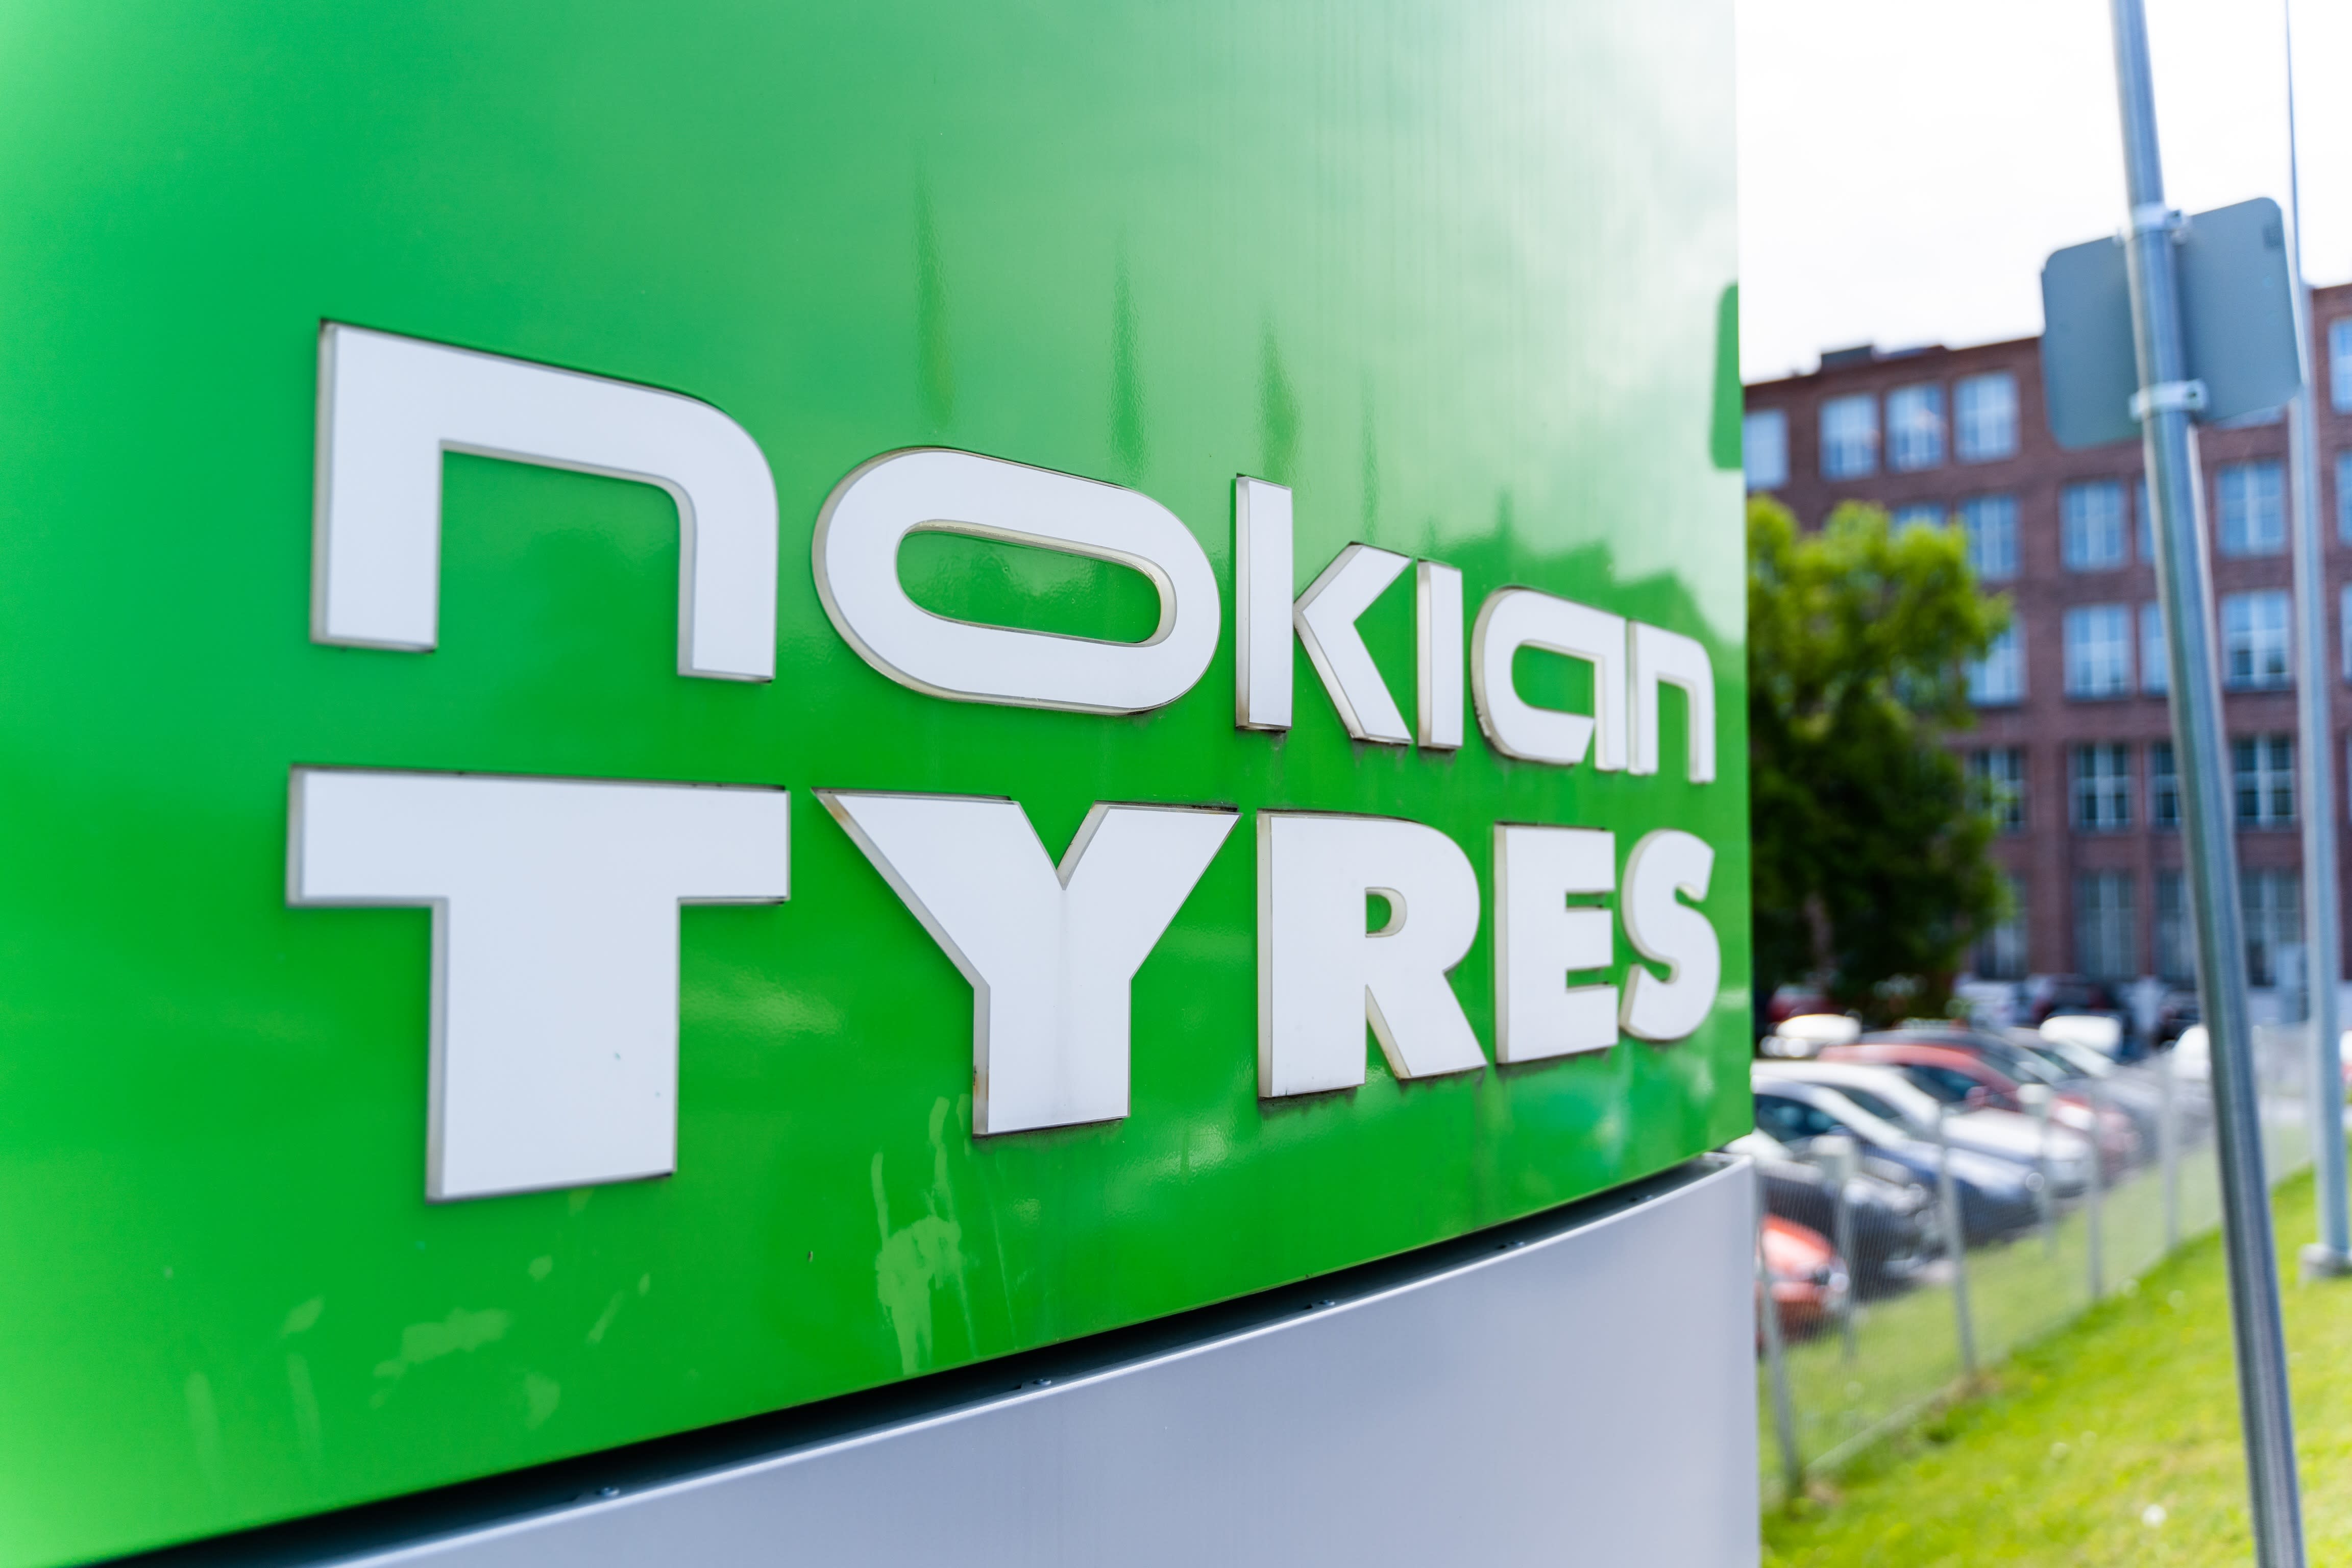 Nokian Tires’ shares will fall after the decision to stay in Russia